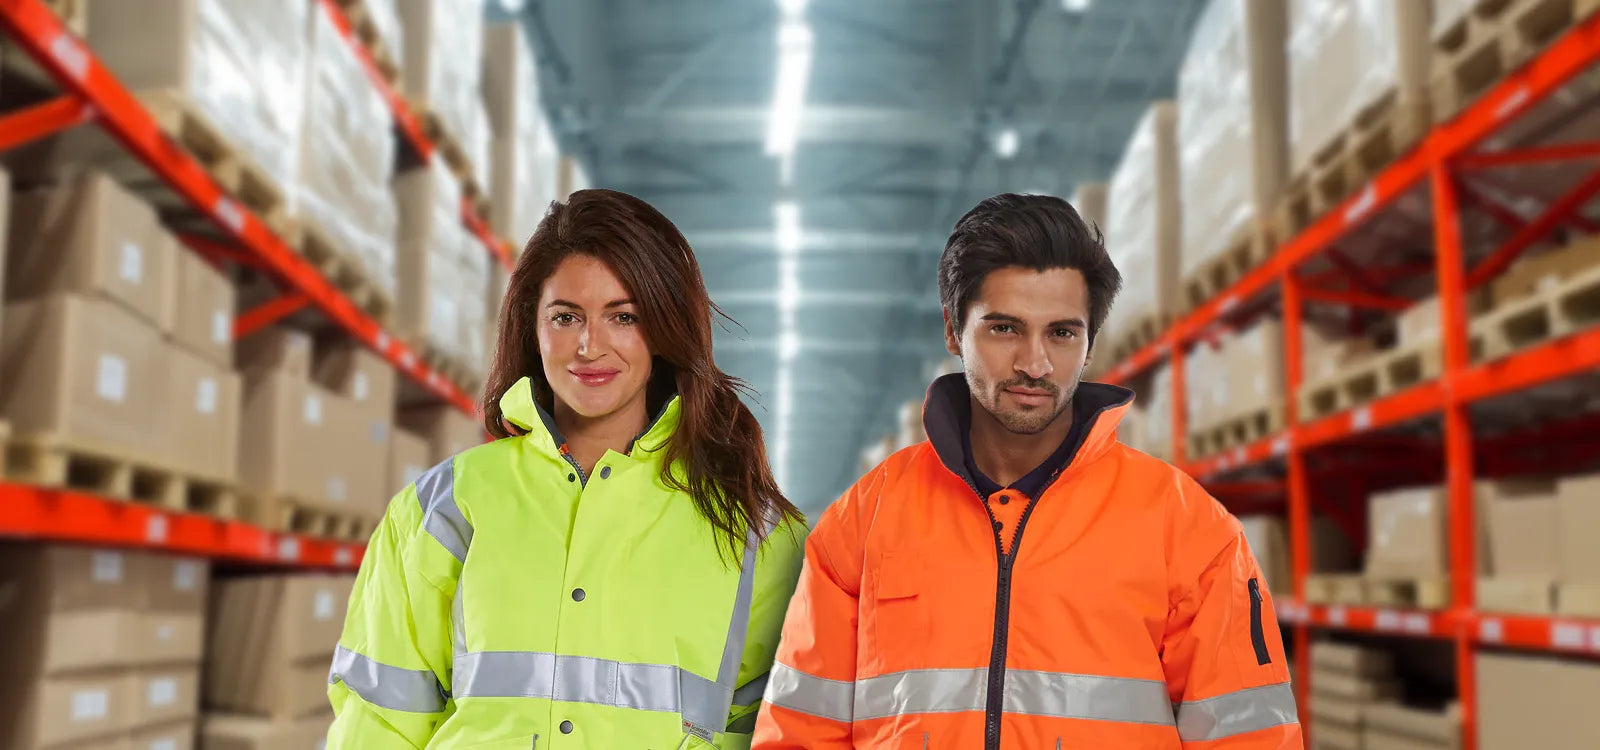 Protective Workwear Direct  - Explore our Range of Orange Hi-Vis Jackets and Hi-Vi s Yellow Jackets